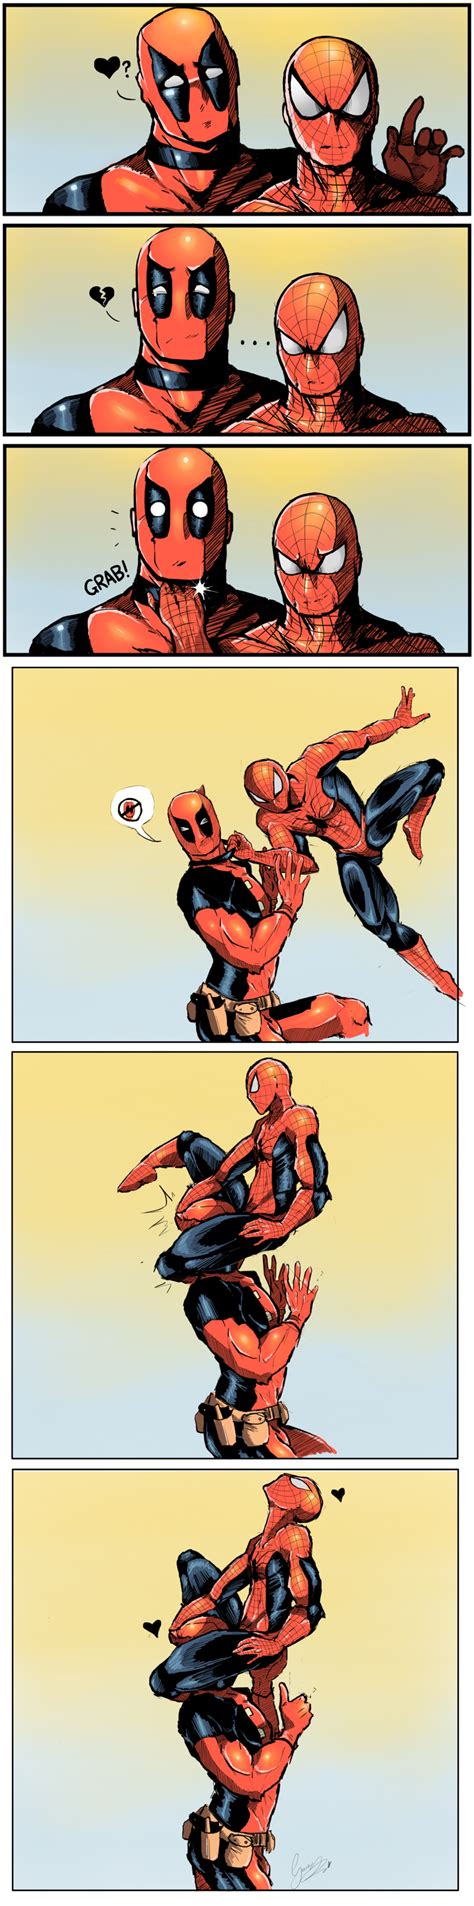 I Have To Admit This It Pretty Funny And Clever Spiderman And Deadpool